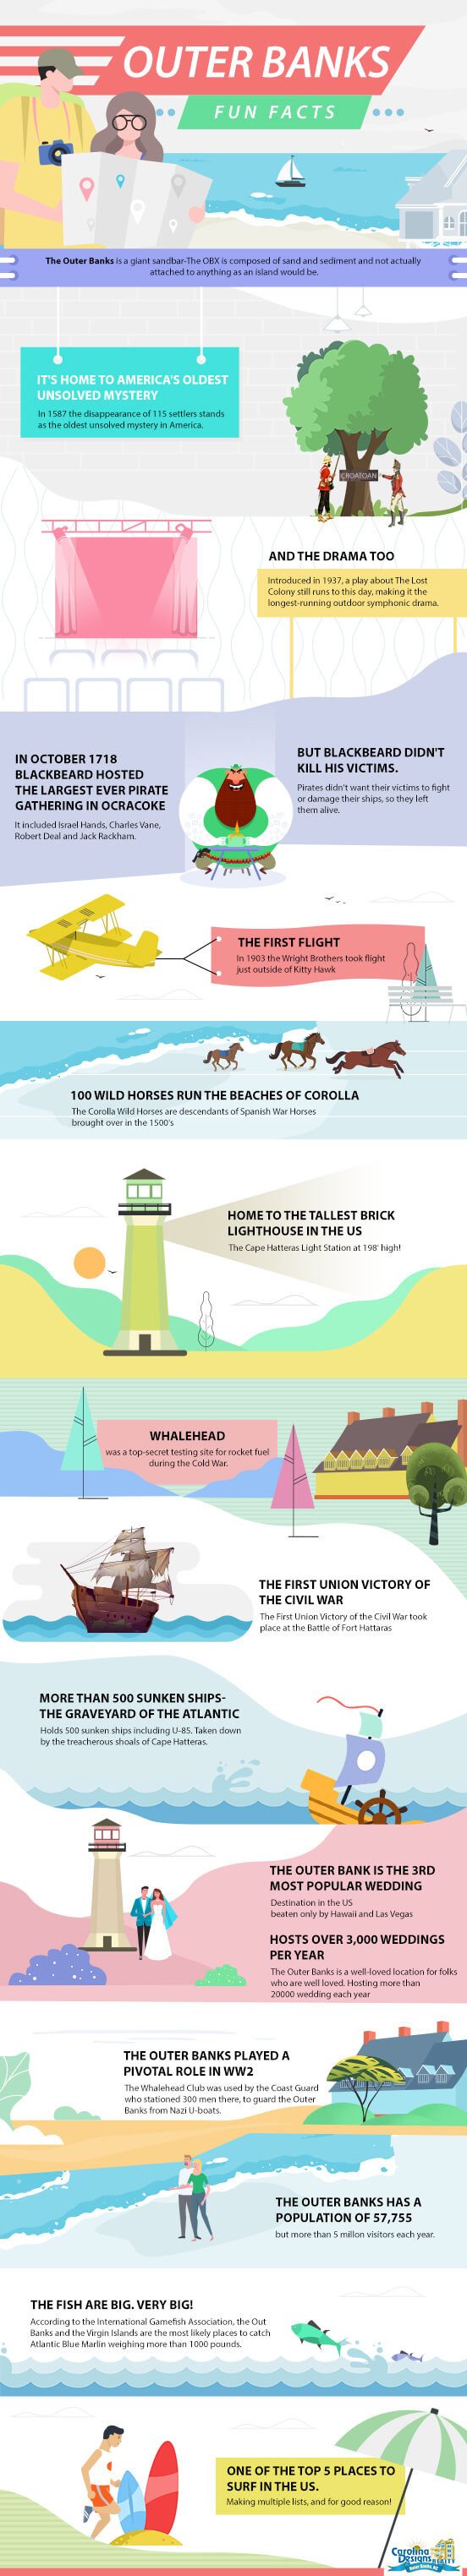 Outer Banks Fun Facts